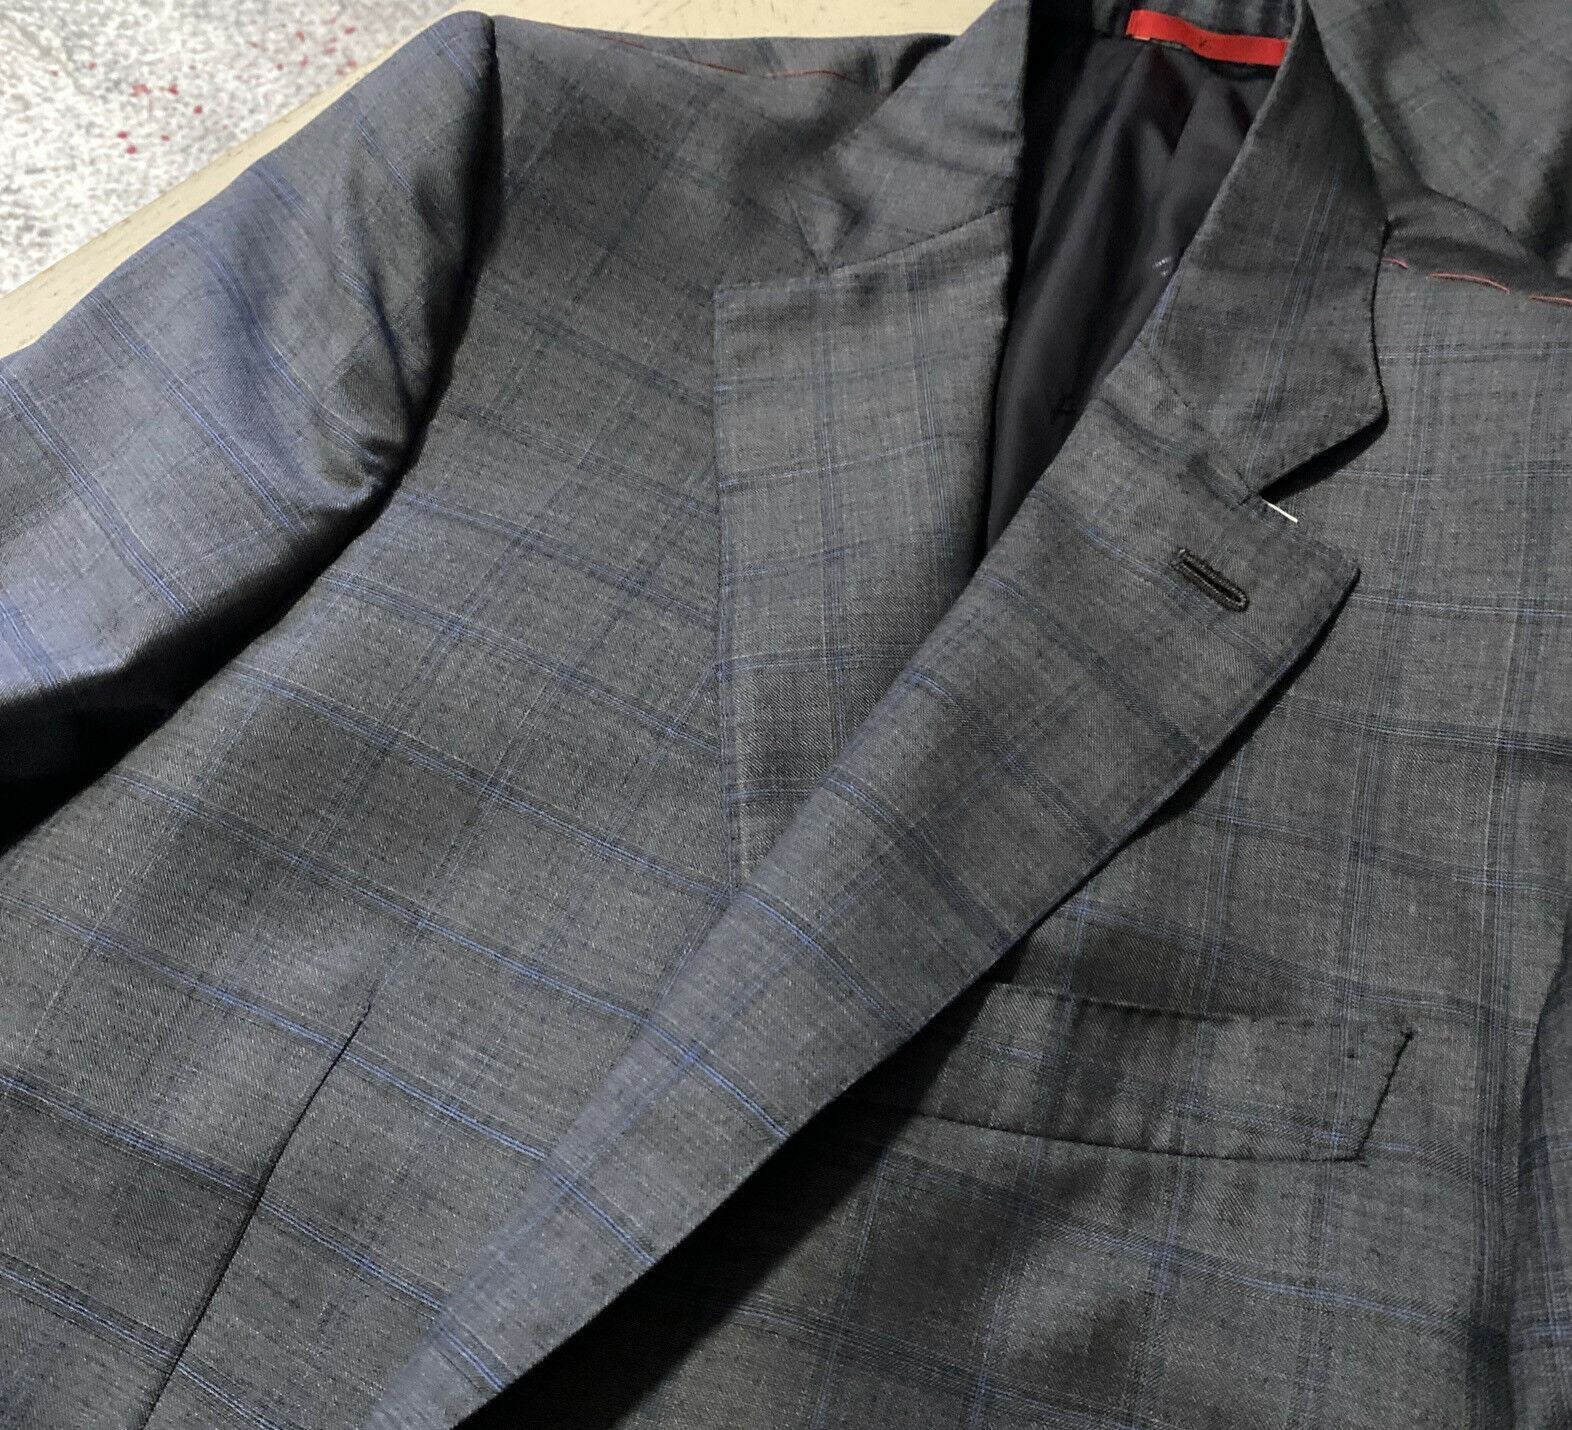 New $4995 ISAIA Wool/Silk Suit DK Gray 42R US ( 52R Eu ) Italy